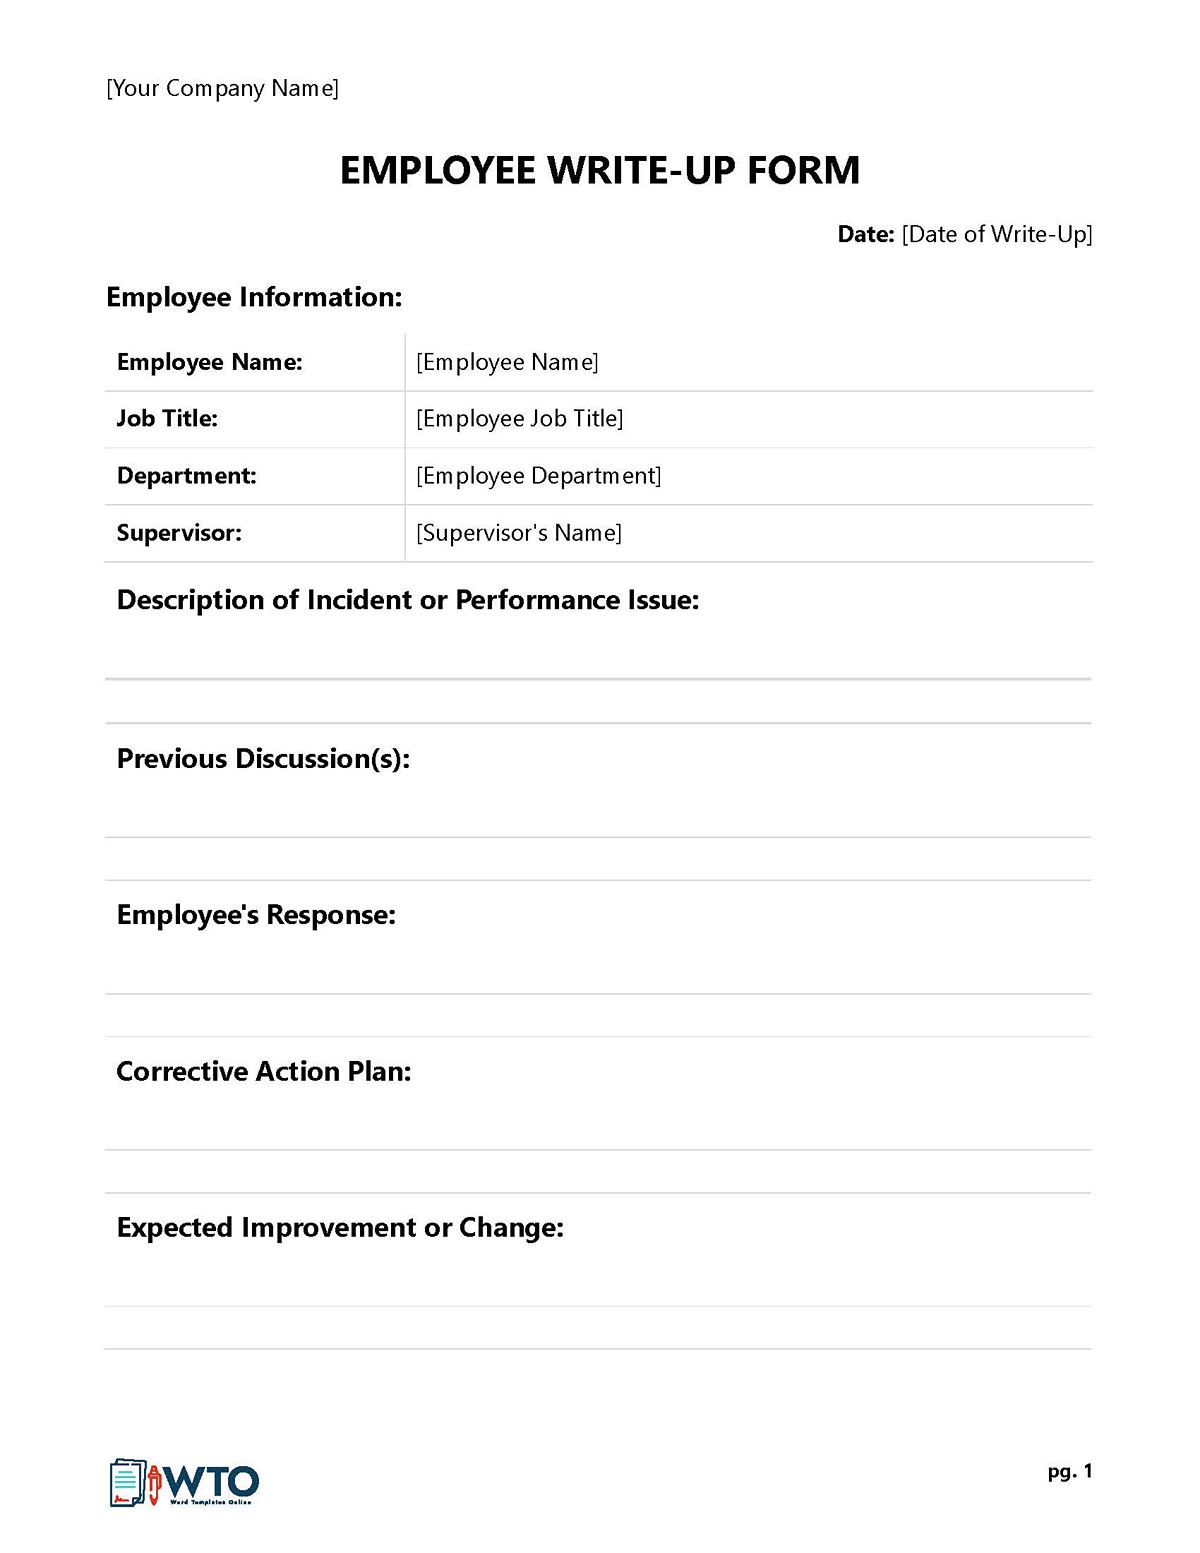 Free Employee Write Up Form Template - Editable Format